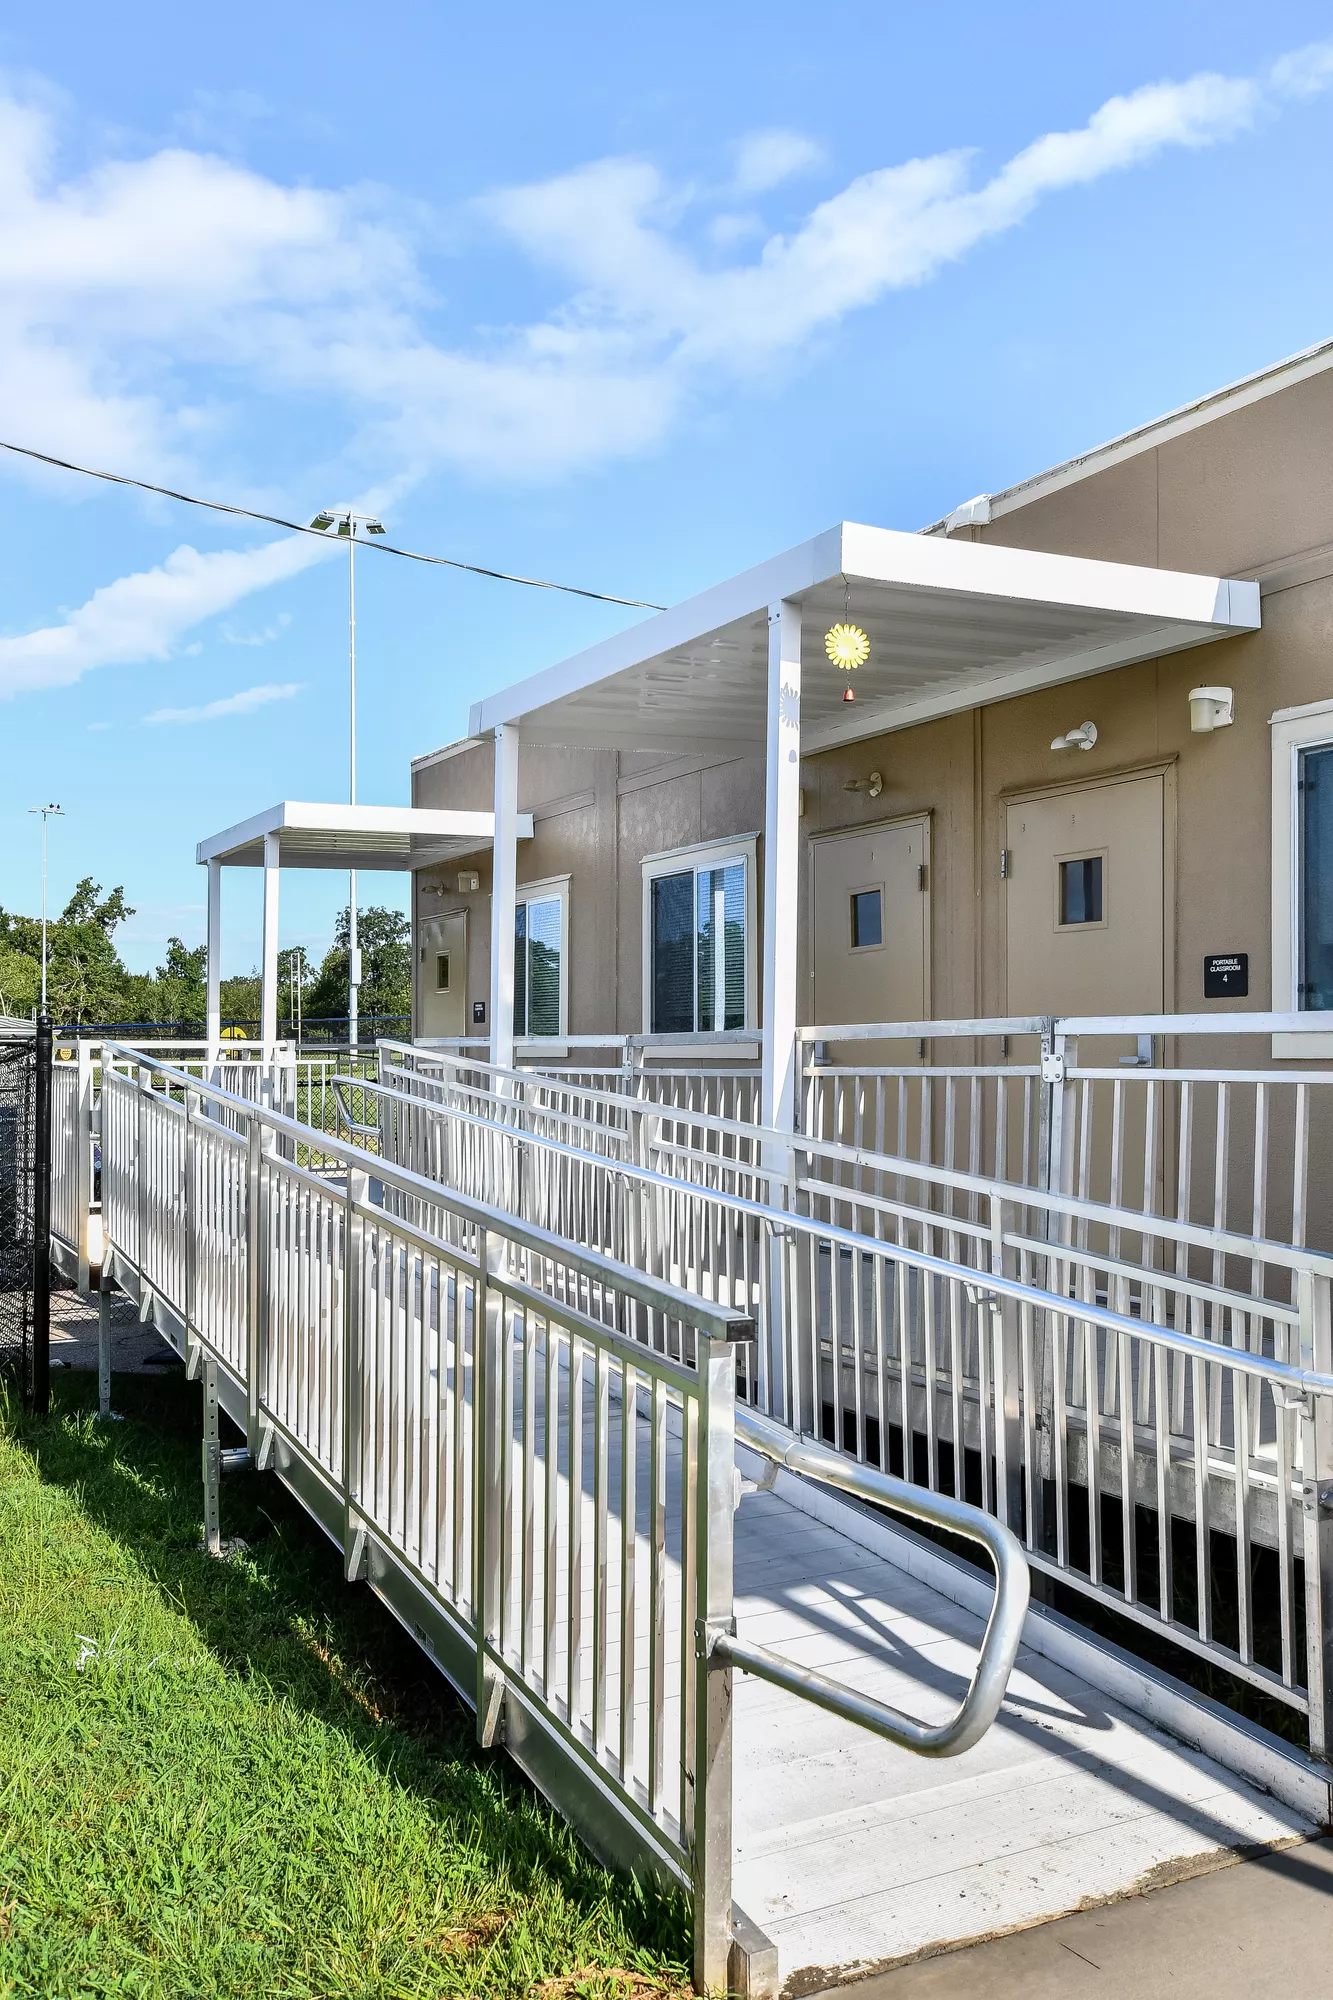 Rent, Lease or Purchase Modular Office Building Solutions